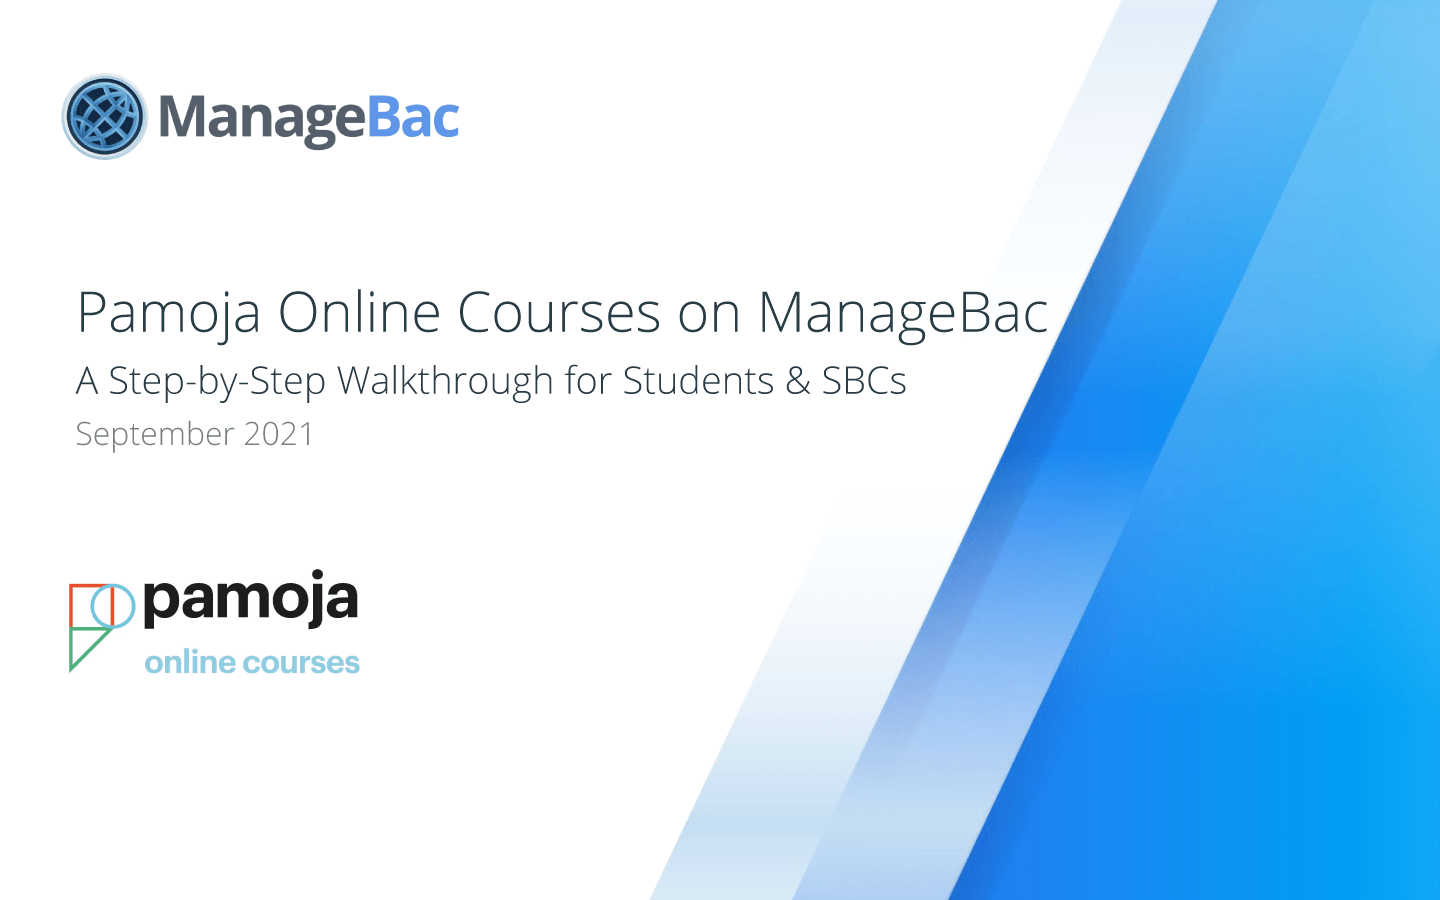 Pamoja Online Courses on ManageBac: A Step-by-Step Walkthrough for Students & SBCs